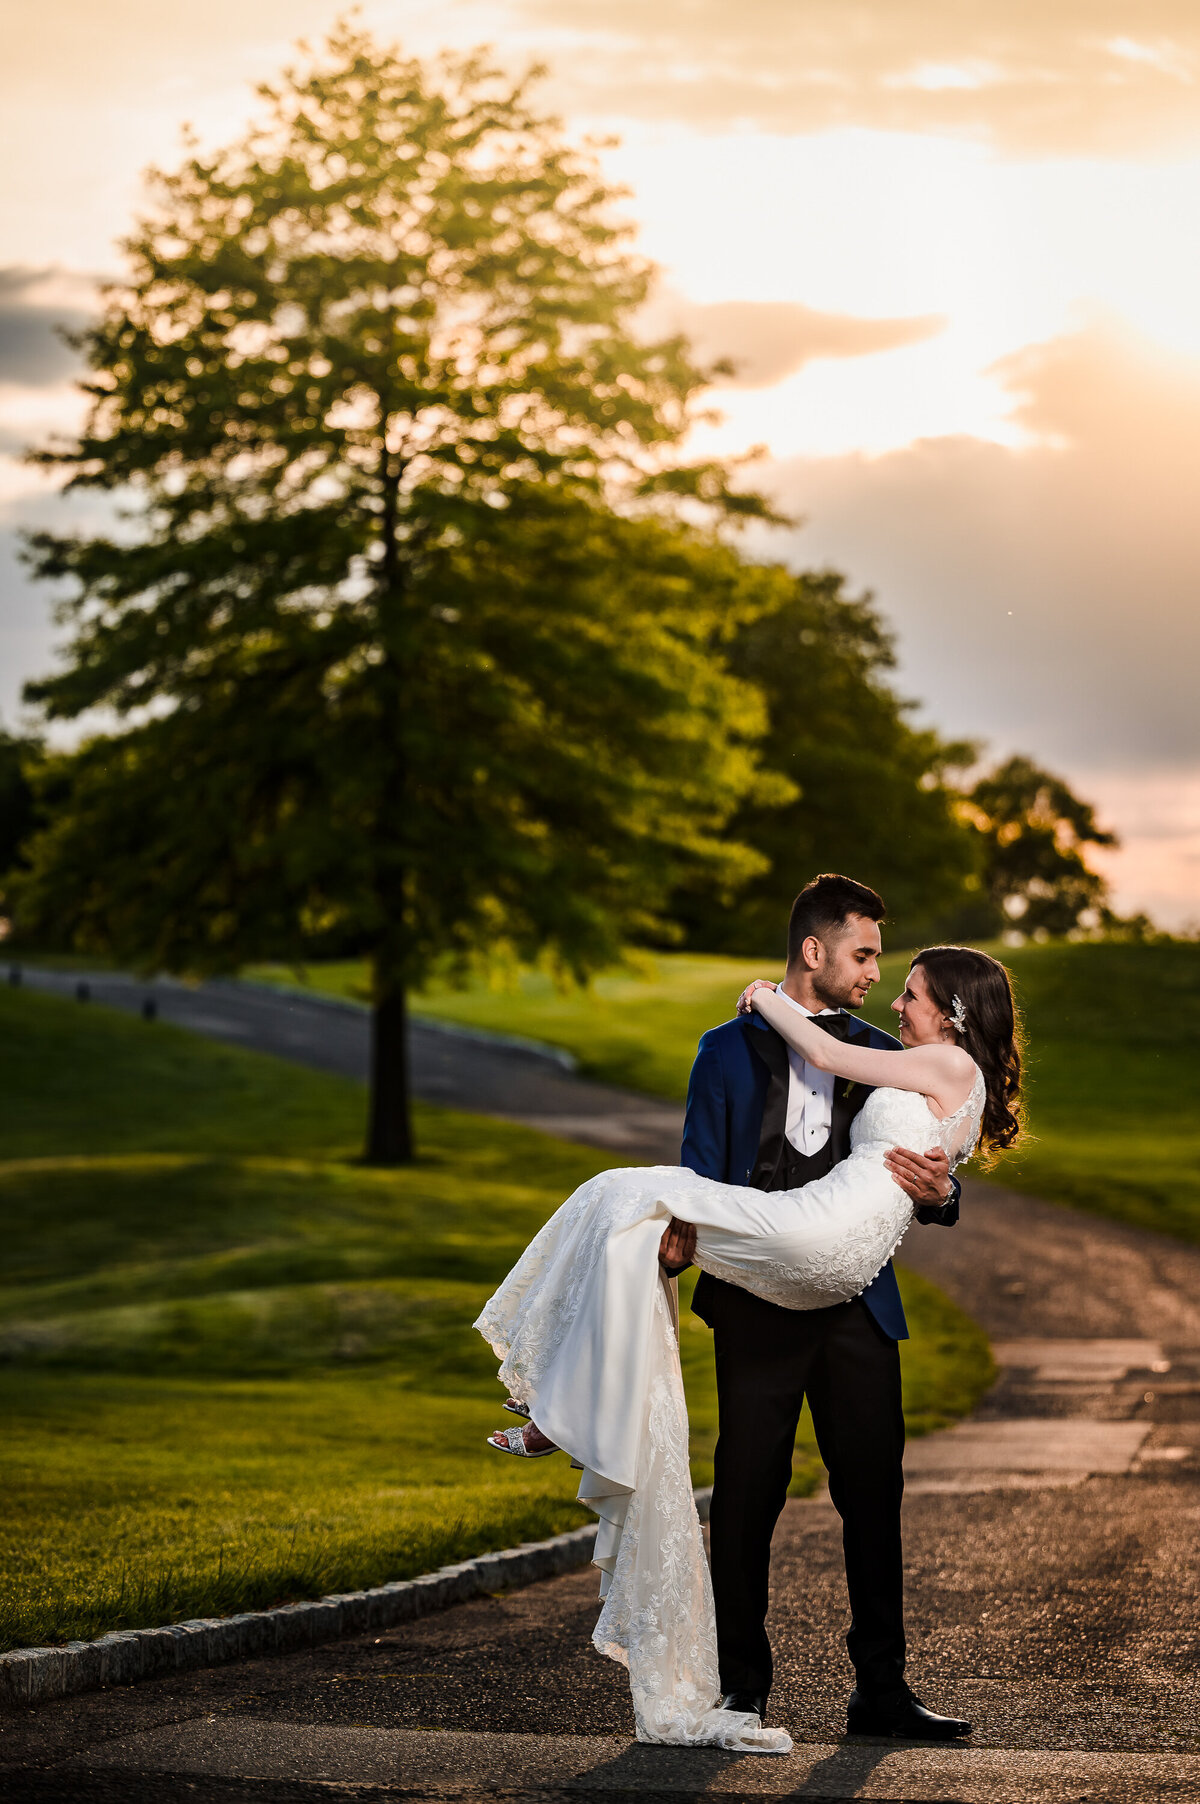 Ishan Fotografi is rated one of the best NYC wedding photographer.